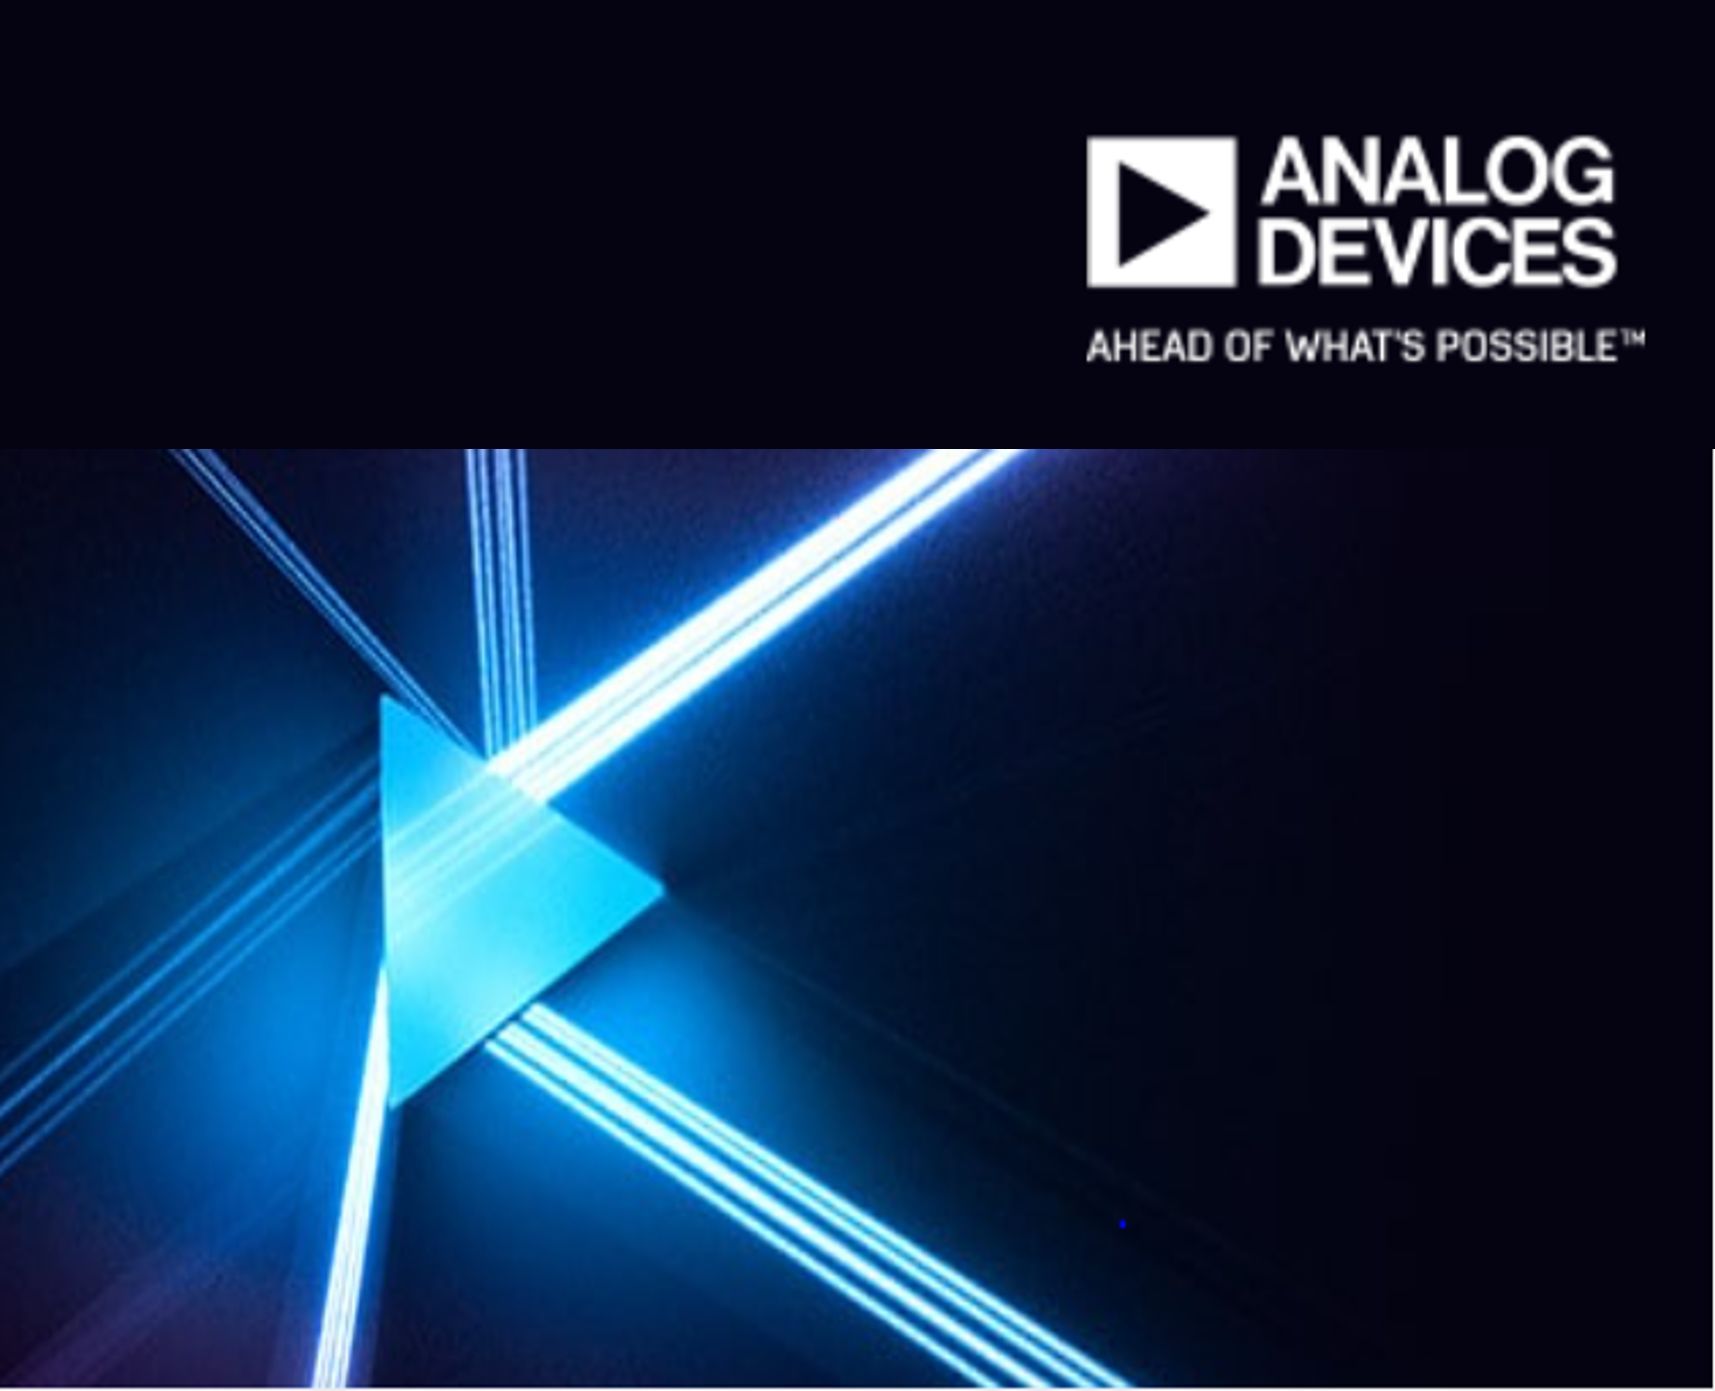 Farnell emphasises precision with Analog Devices signal chains